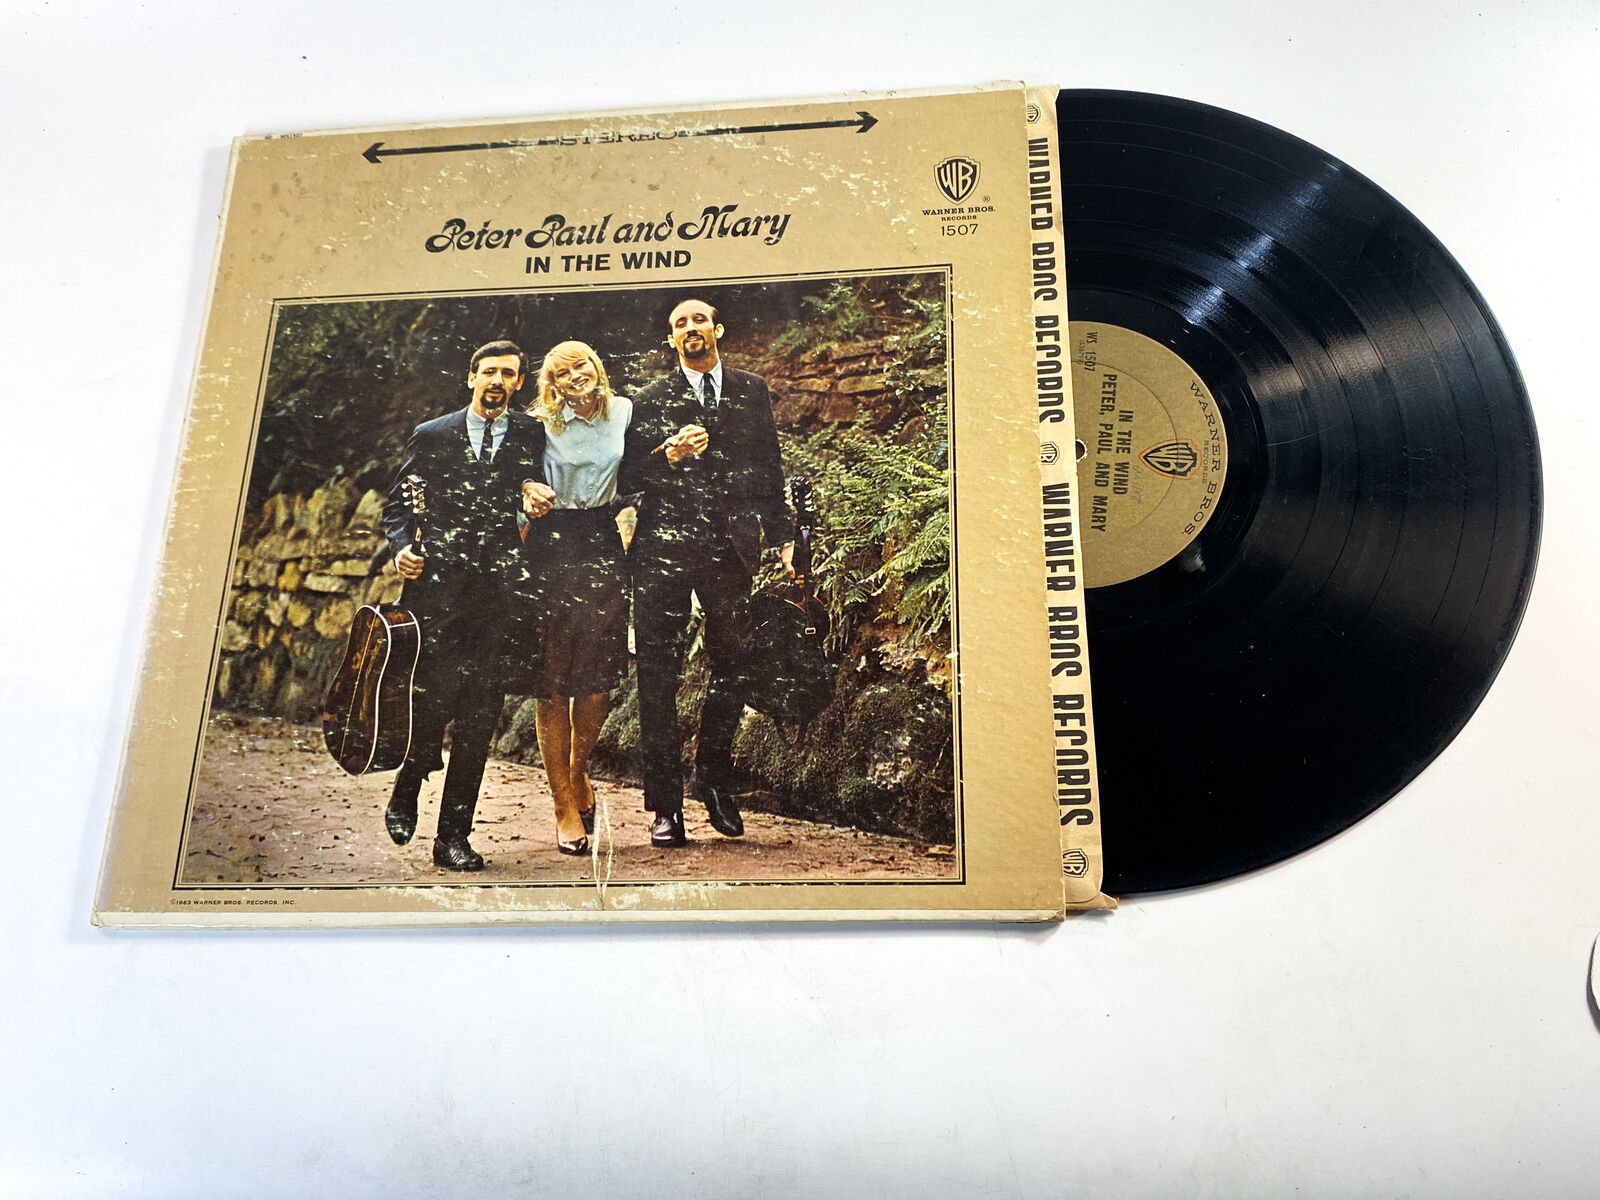 Peter, Paul & Mary-In The Wind-Vintage Vinyl Record EX/VG+  Ultrasonic Clean